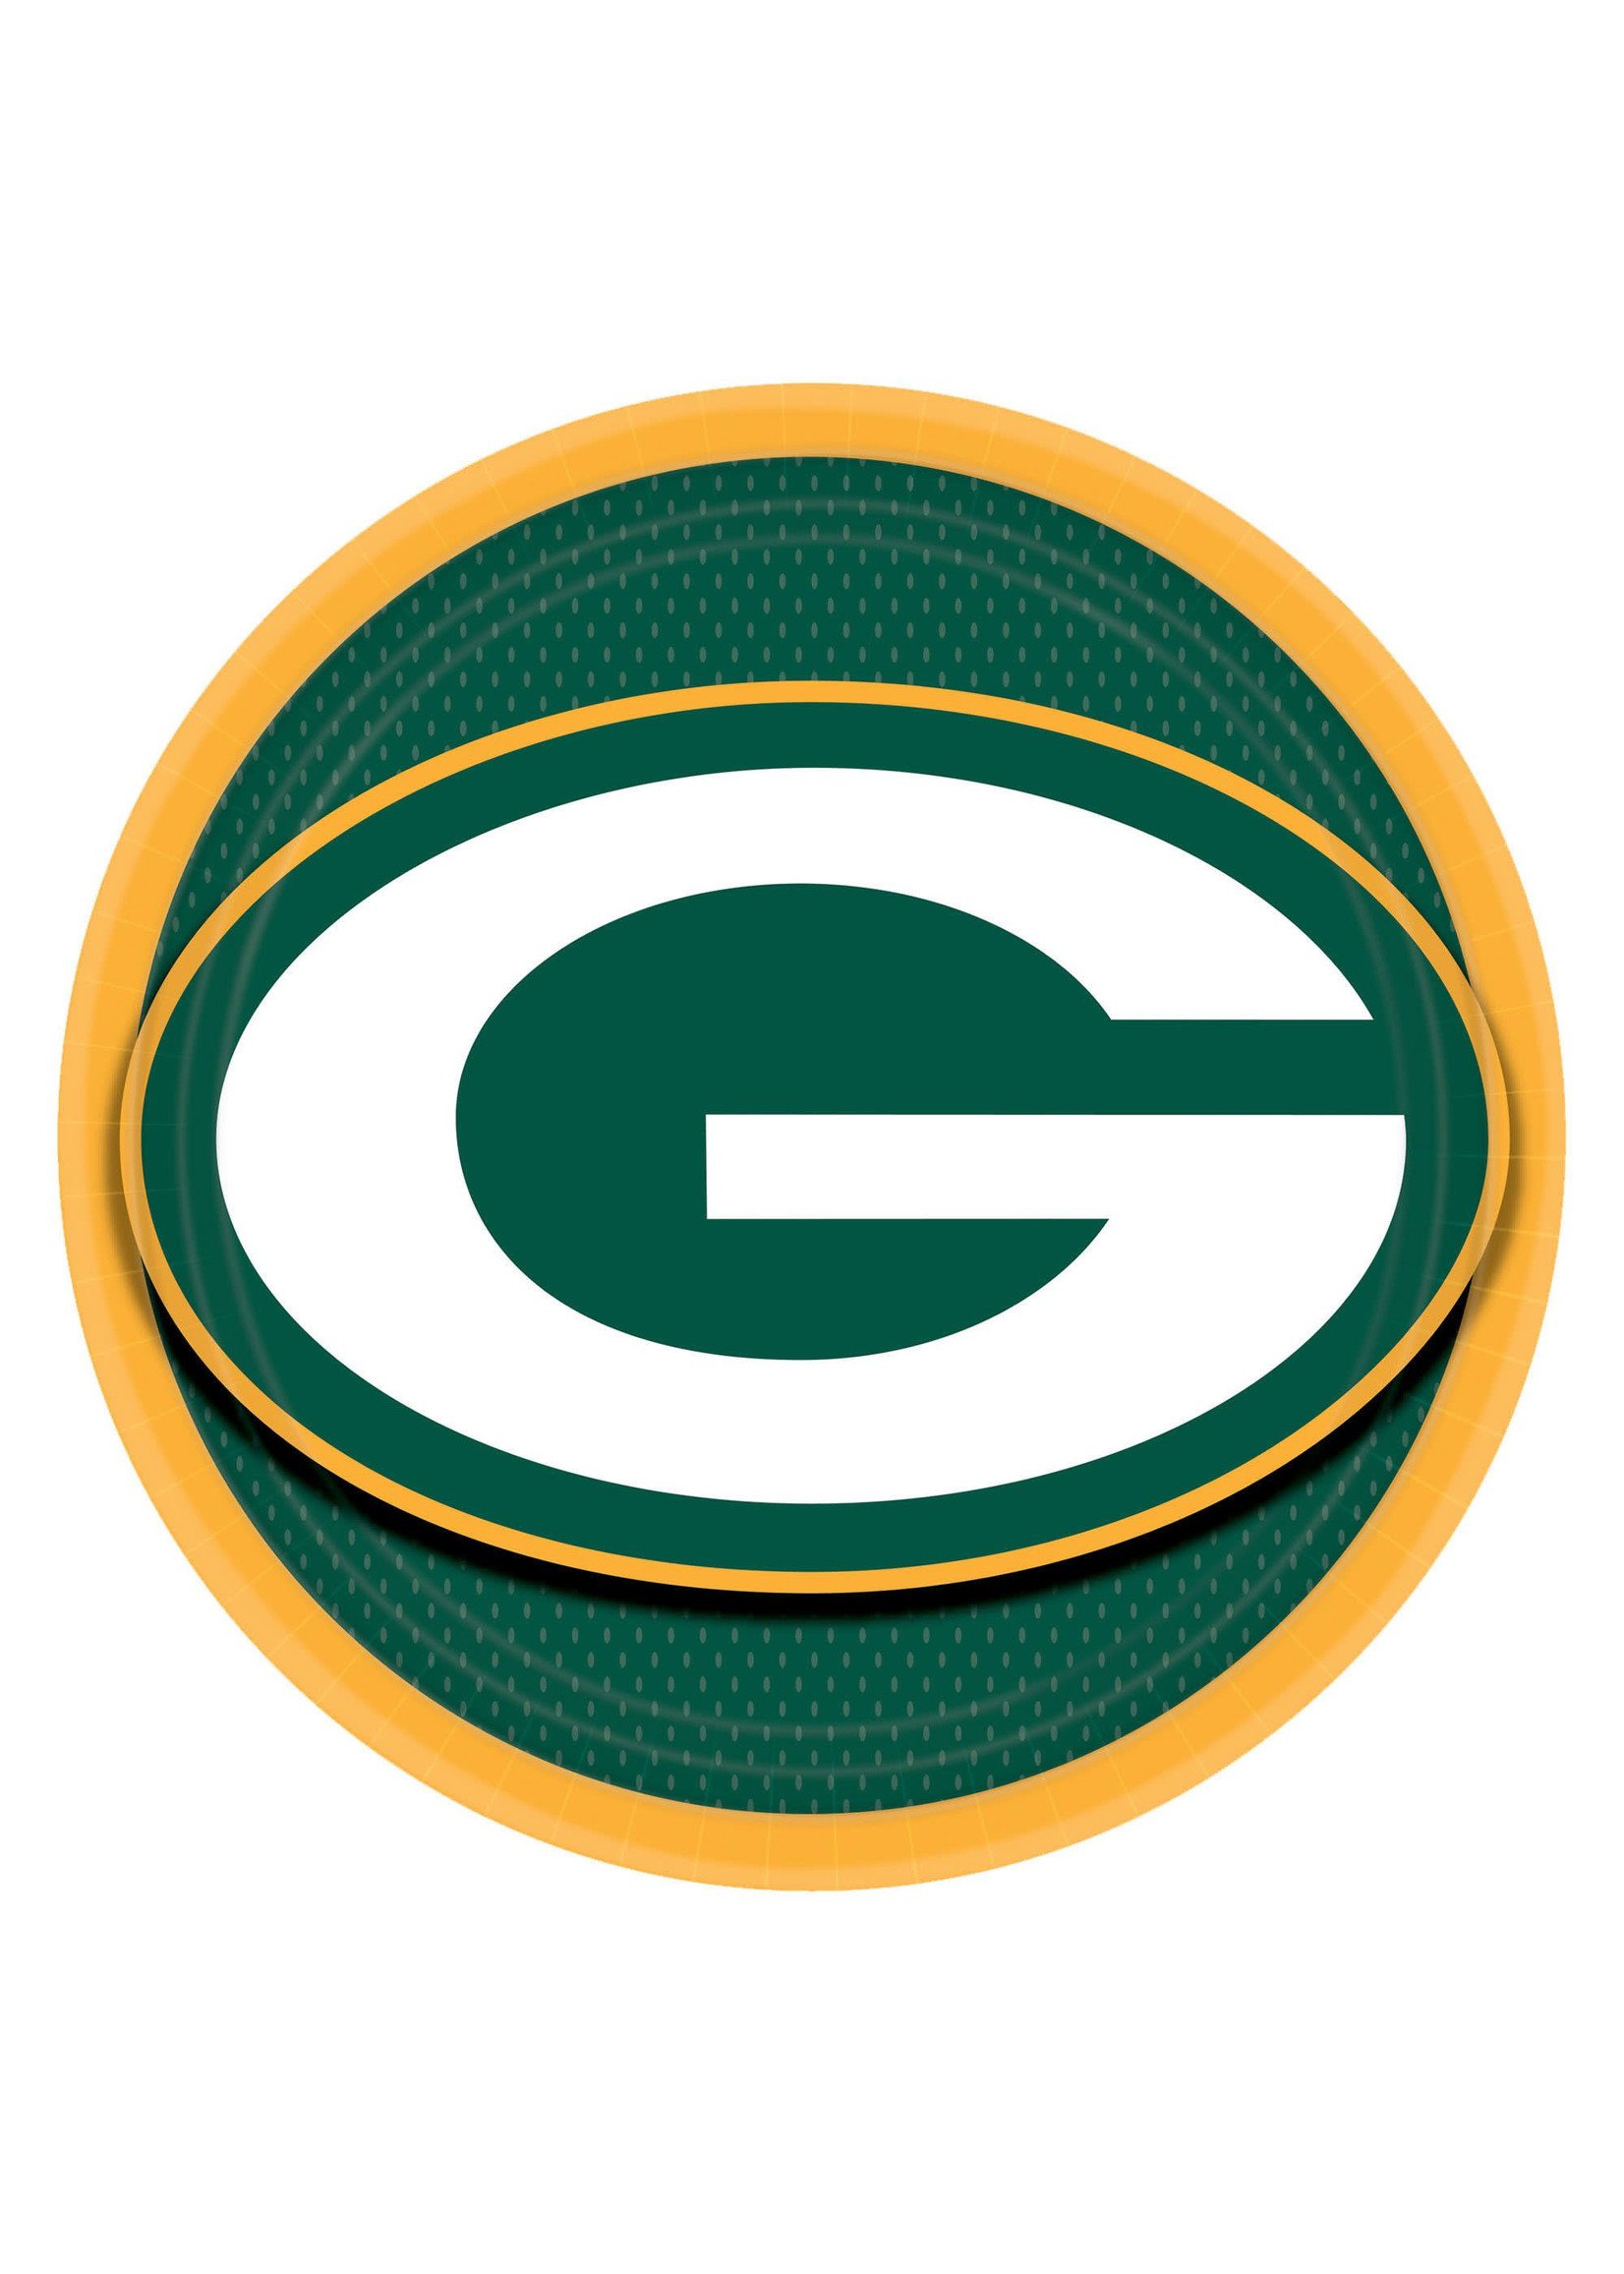 Green Bay Packers 9" Paper Plates - 8ct